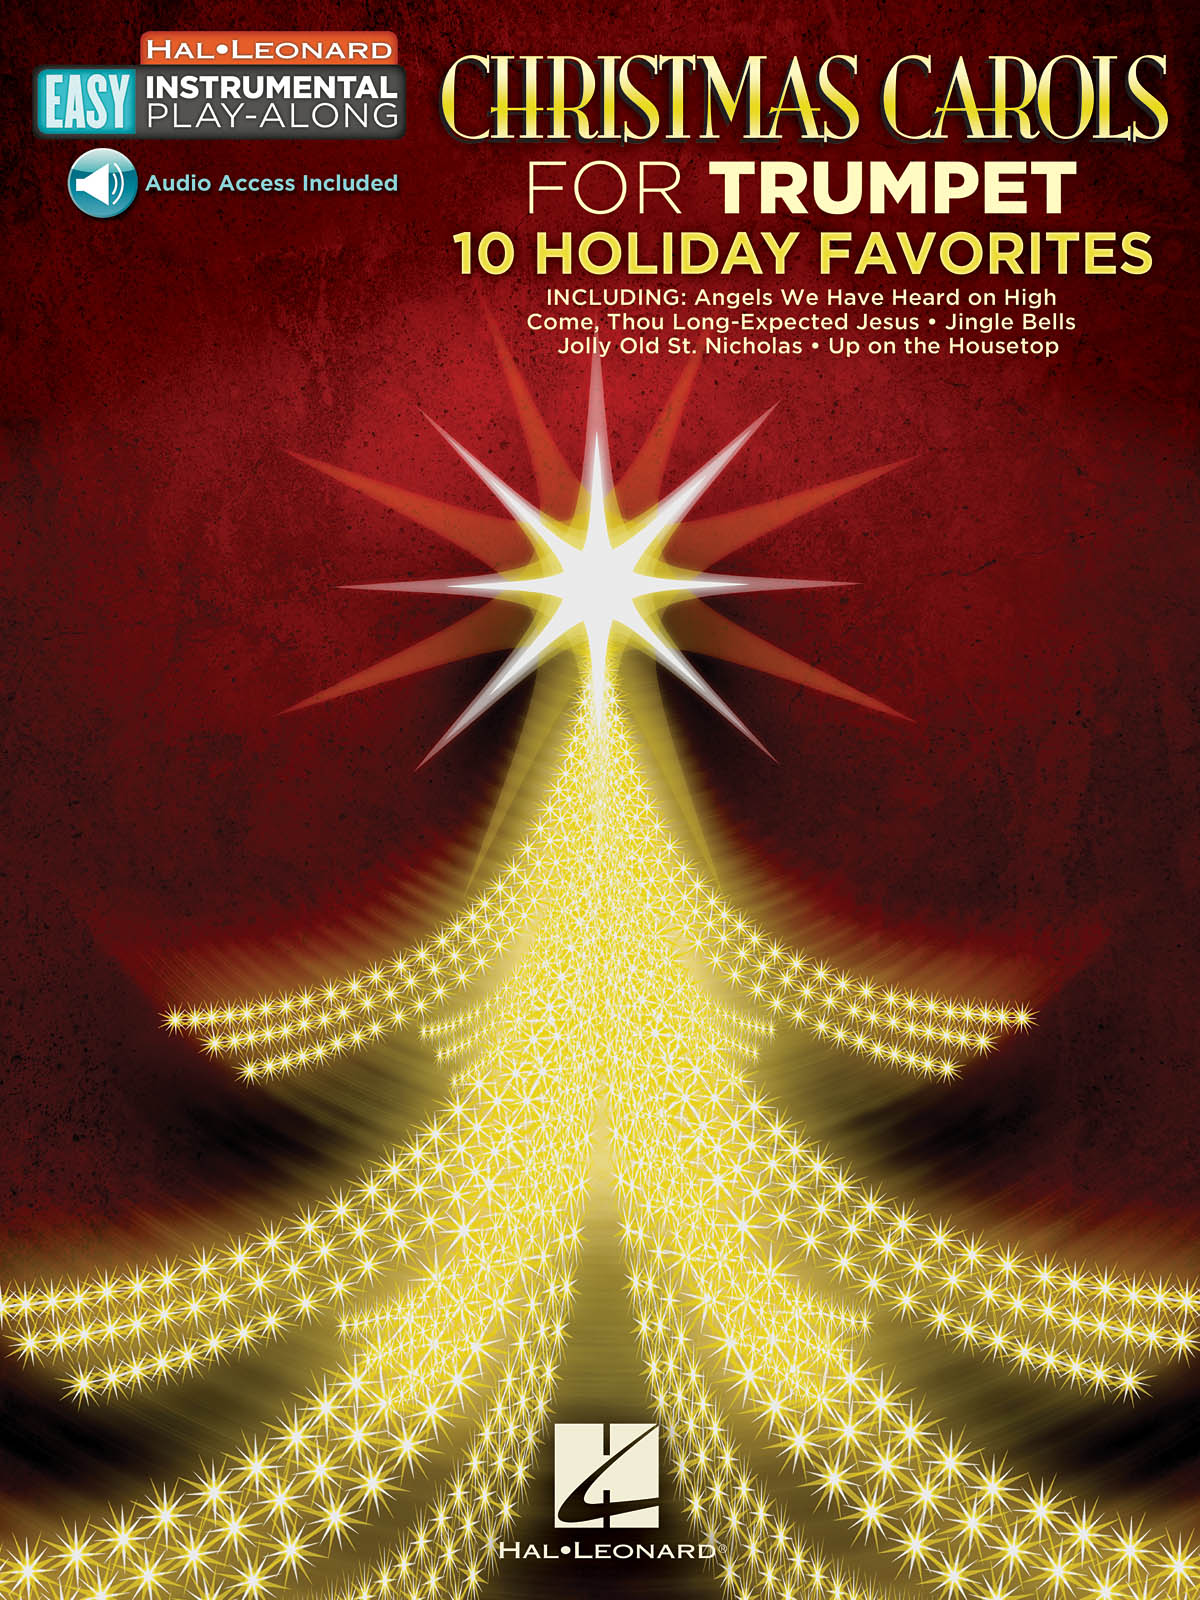 Christmas Carols - Trumpet: 10 Holiday Favorites - Easy Instrumental Play-Along Book with Online Audio Tracks - noty pro trubku